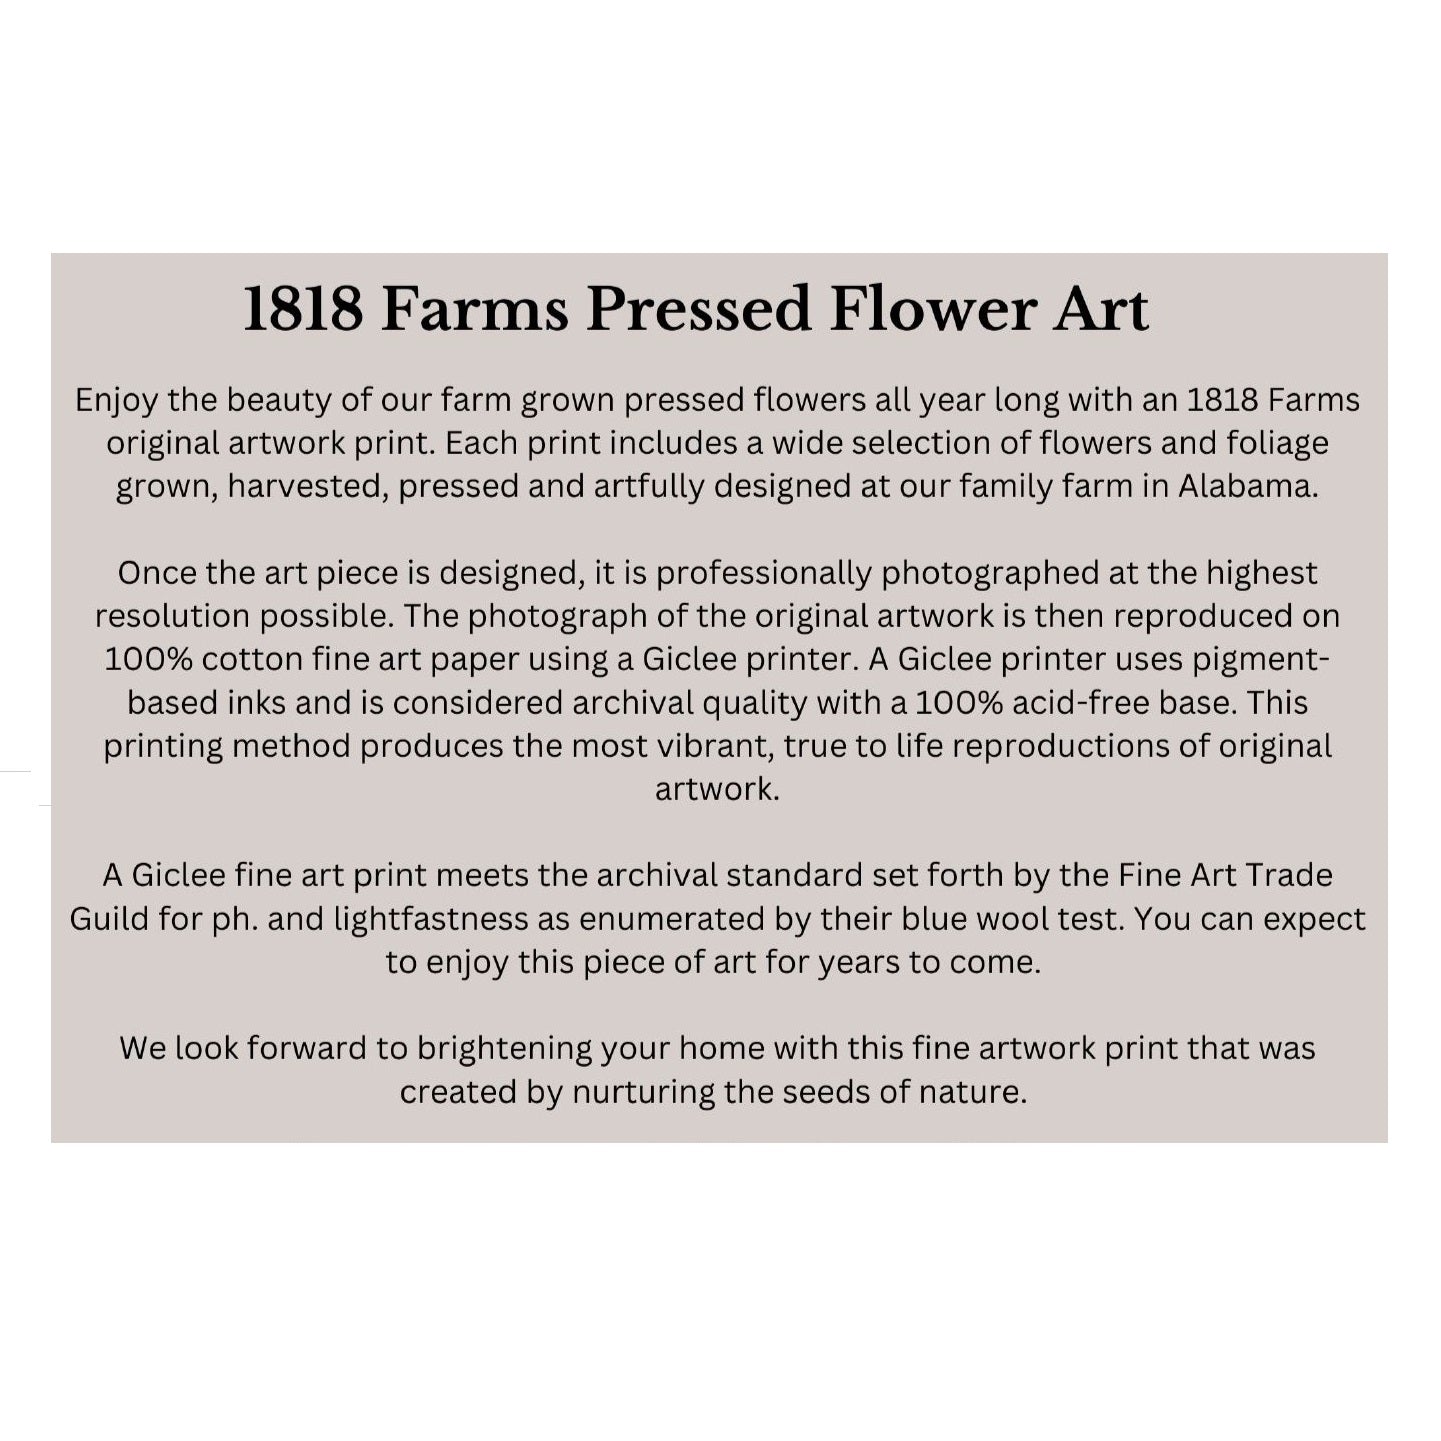 Mississippi Themed Giclée Print Featuring Dried, Pressed Flowers - "Where I Bloom" Collection Giclee Art Print 1818 Farms   